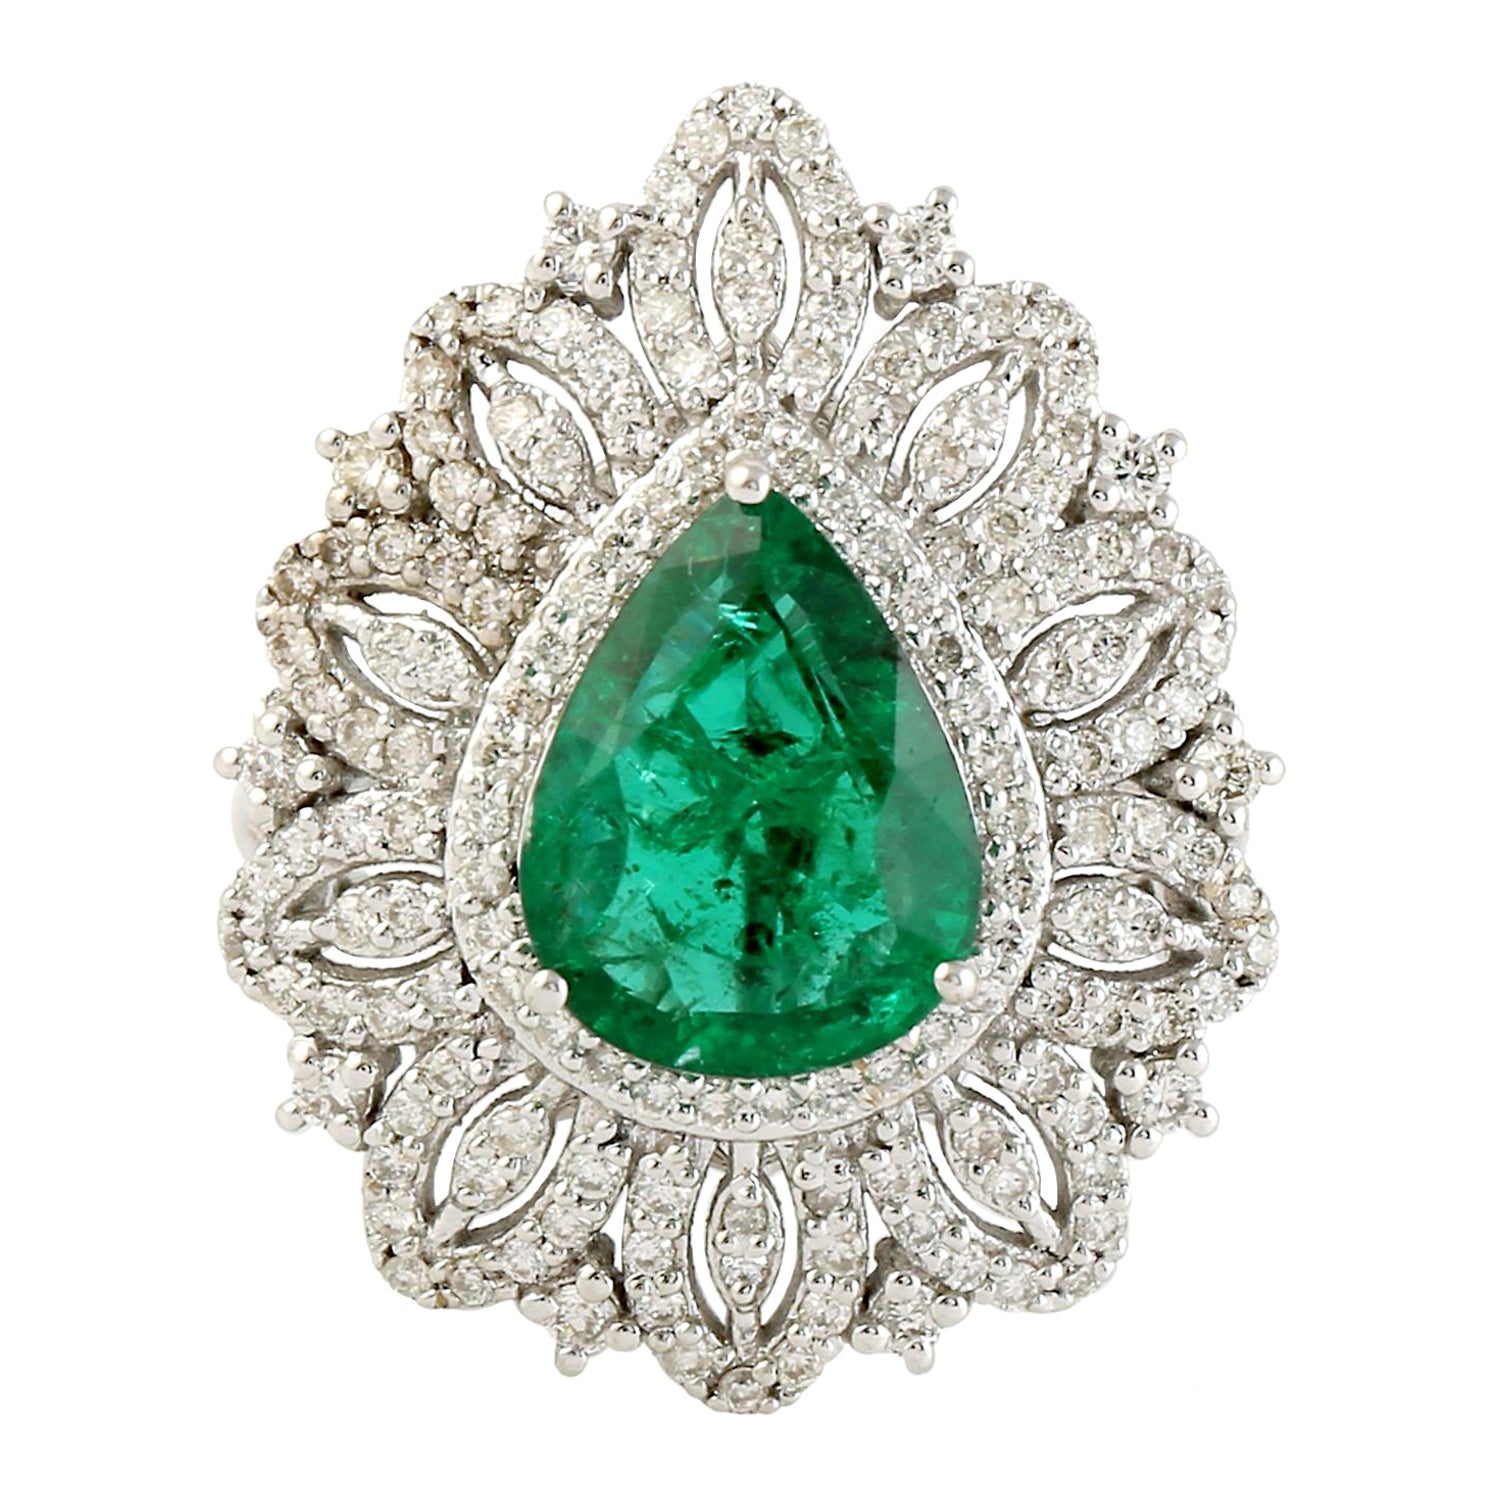 2.98 ct Pear Shaped Zambian Emerald Ring With Diamonds Made in 18k White Gold